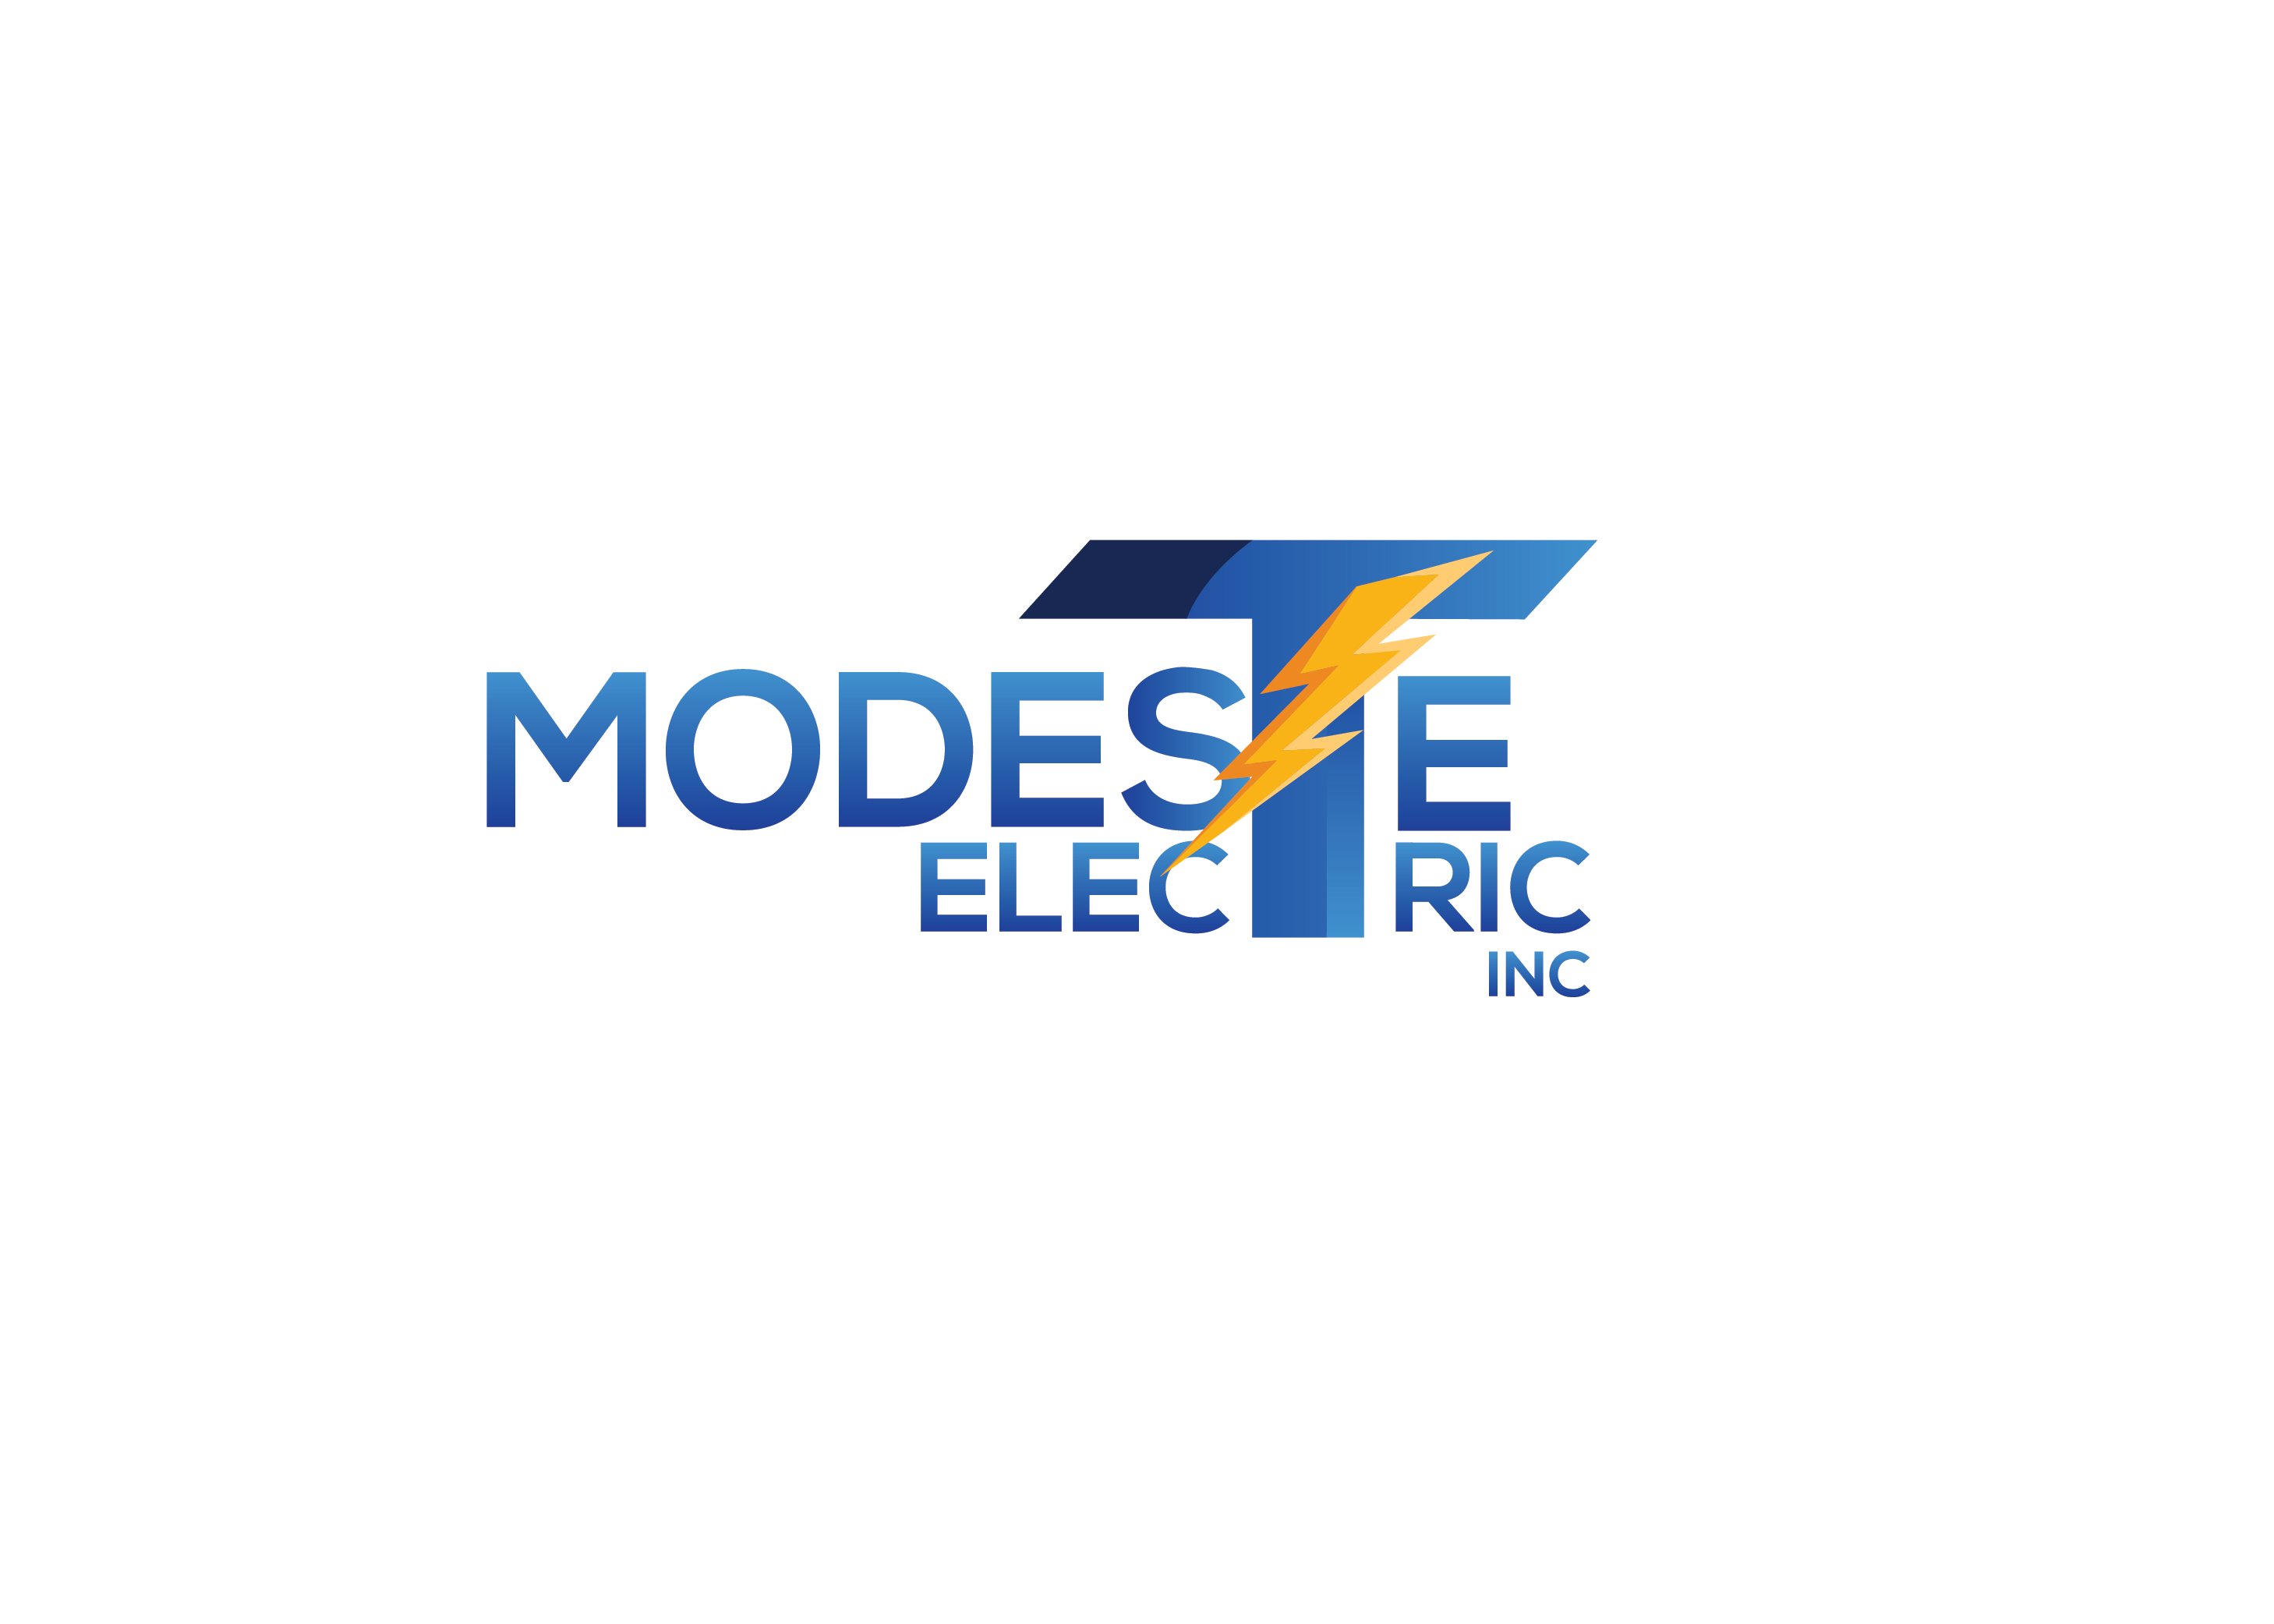 Providing quality electrical service to our community with modesty and pride.